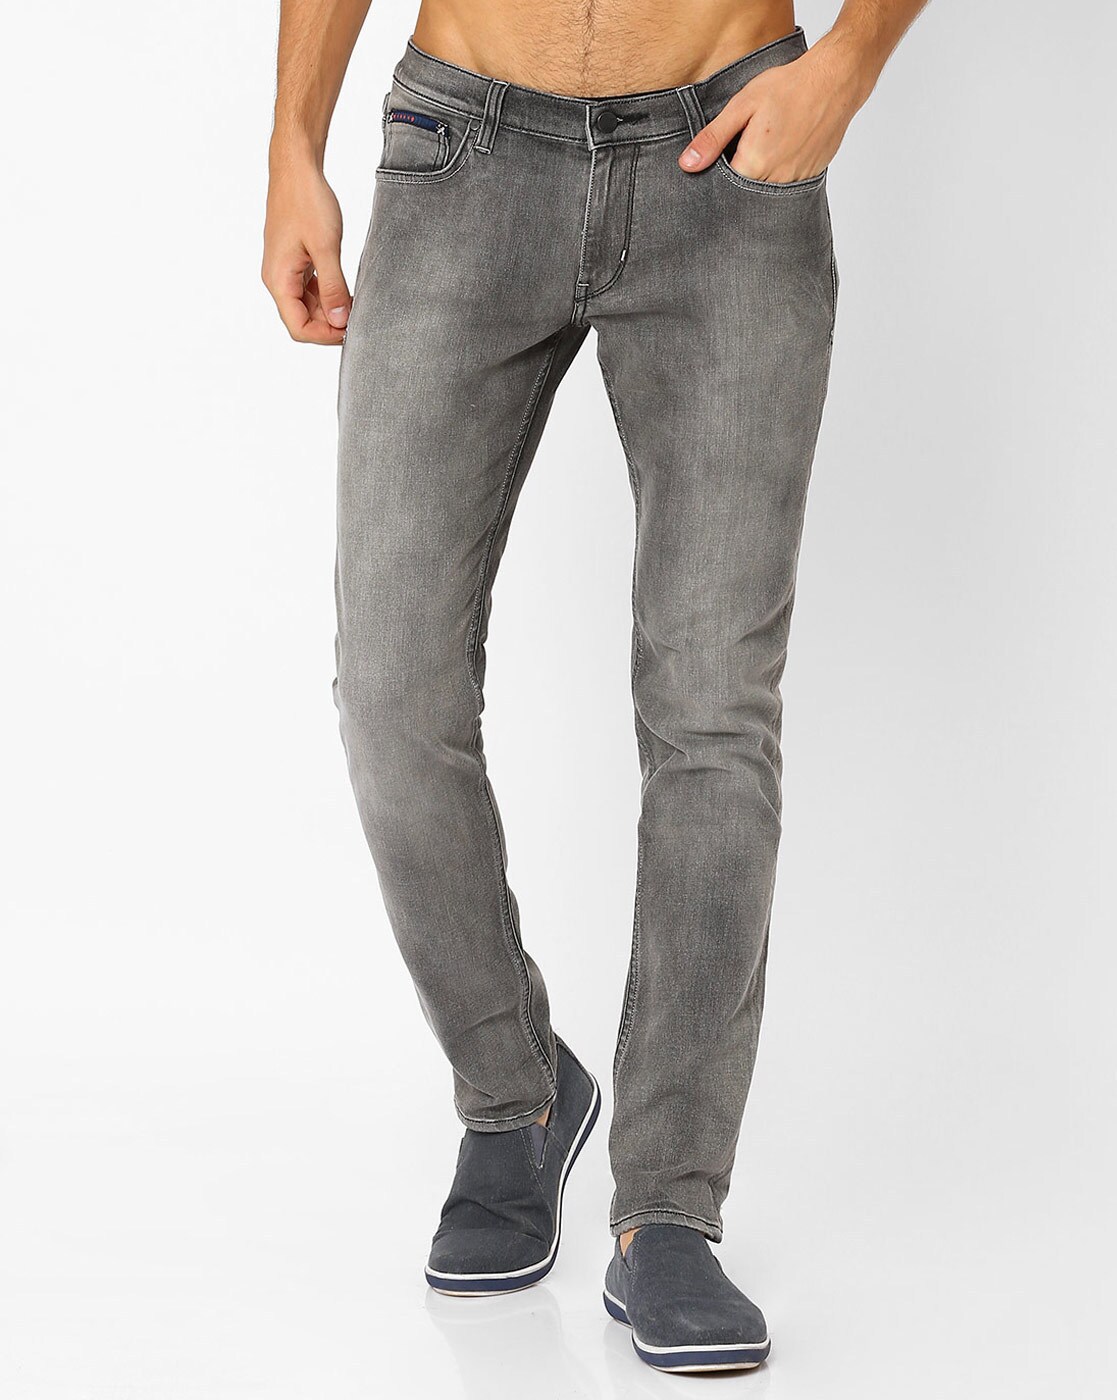 lee gray jeans